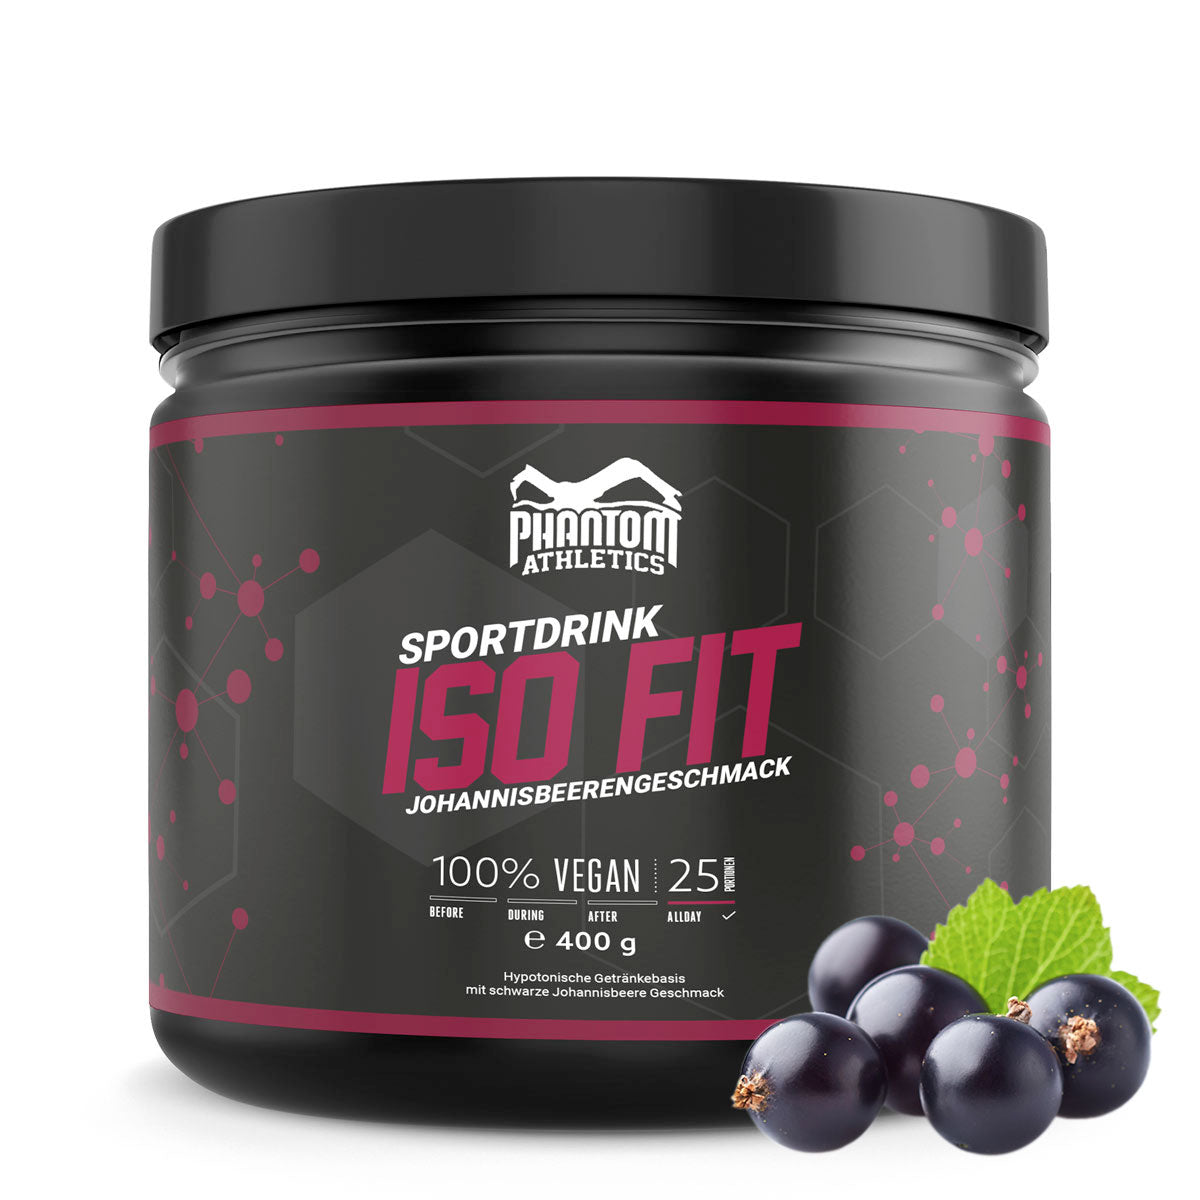 The Phantom ISO FIT nutritional supplement provides you with everything you need for martial arts training. Now with a delicious currant taste.